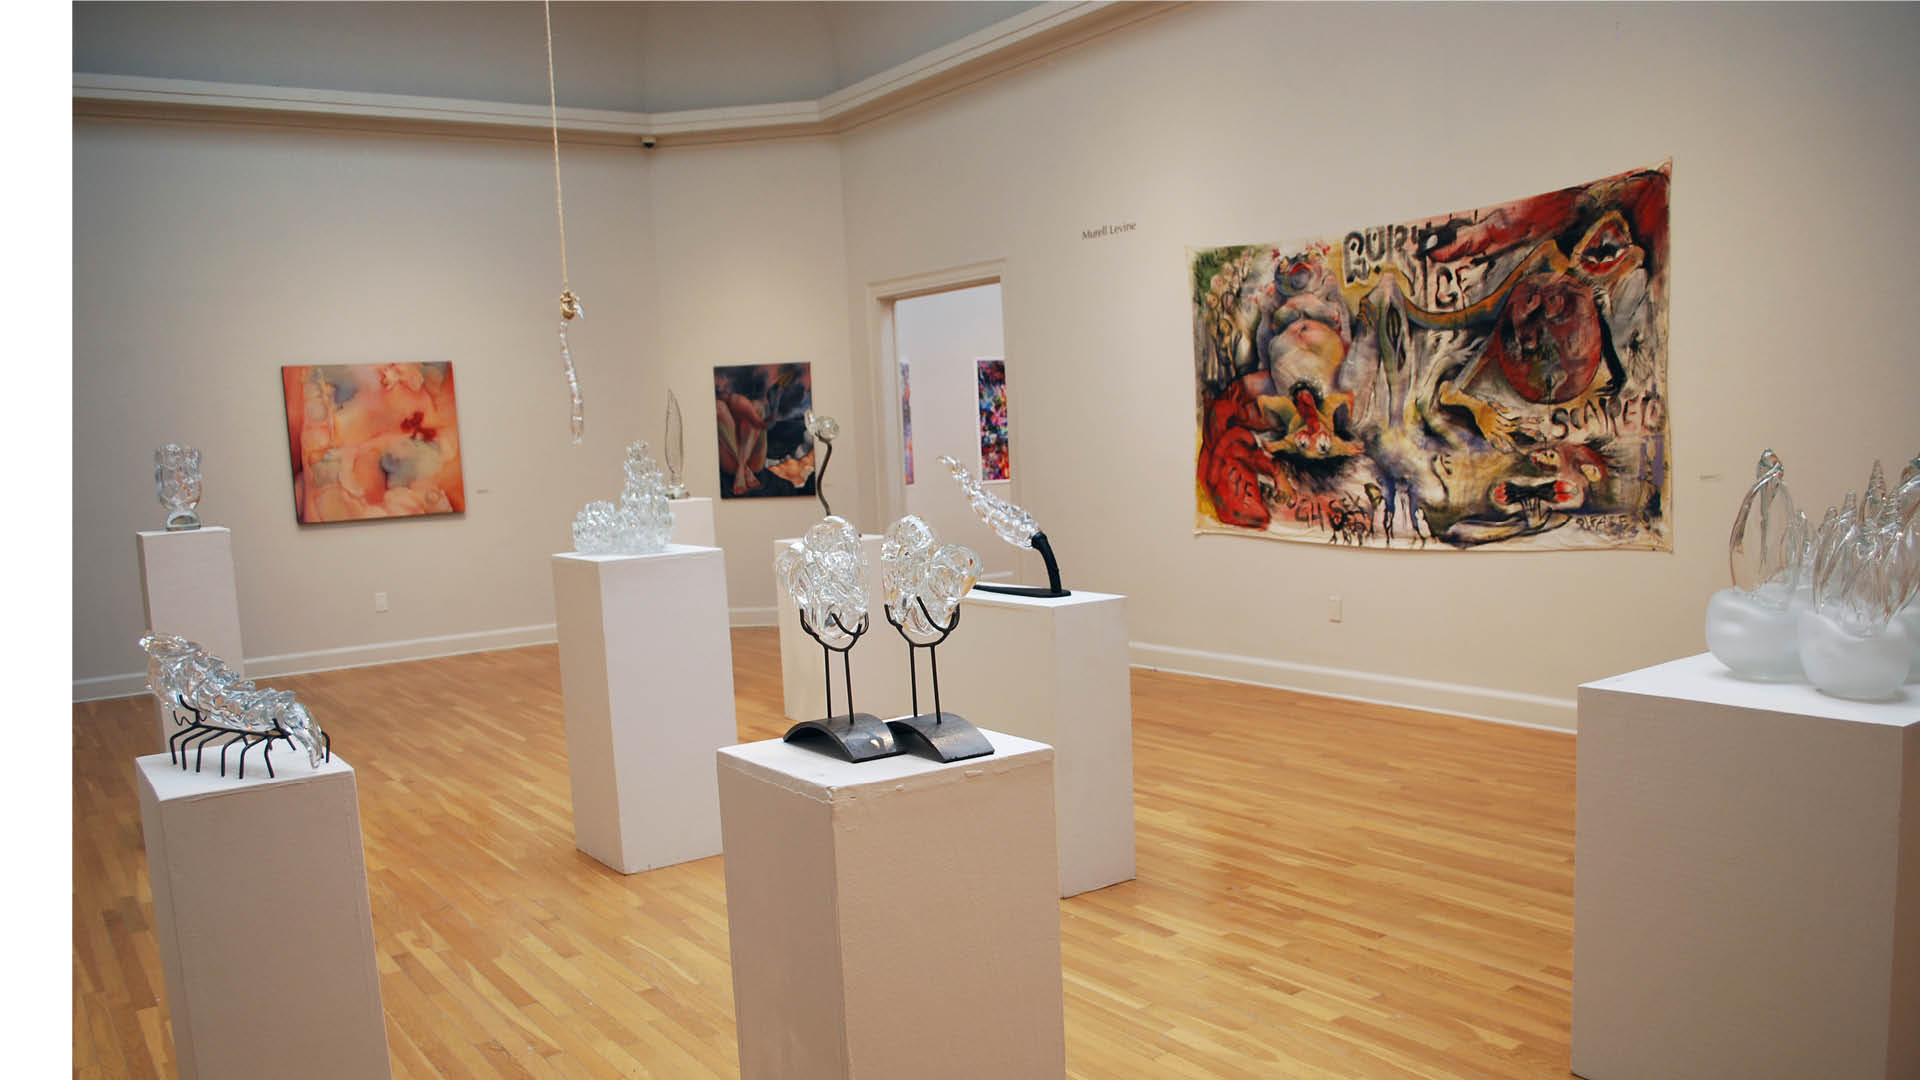 overview of gallery with glass sculpture by Leo Fine and paintings on canvas by Murell Levine